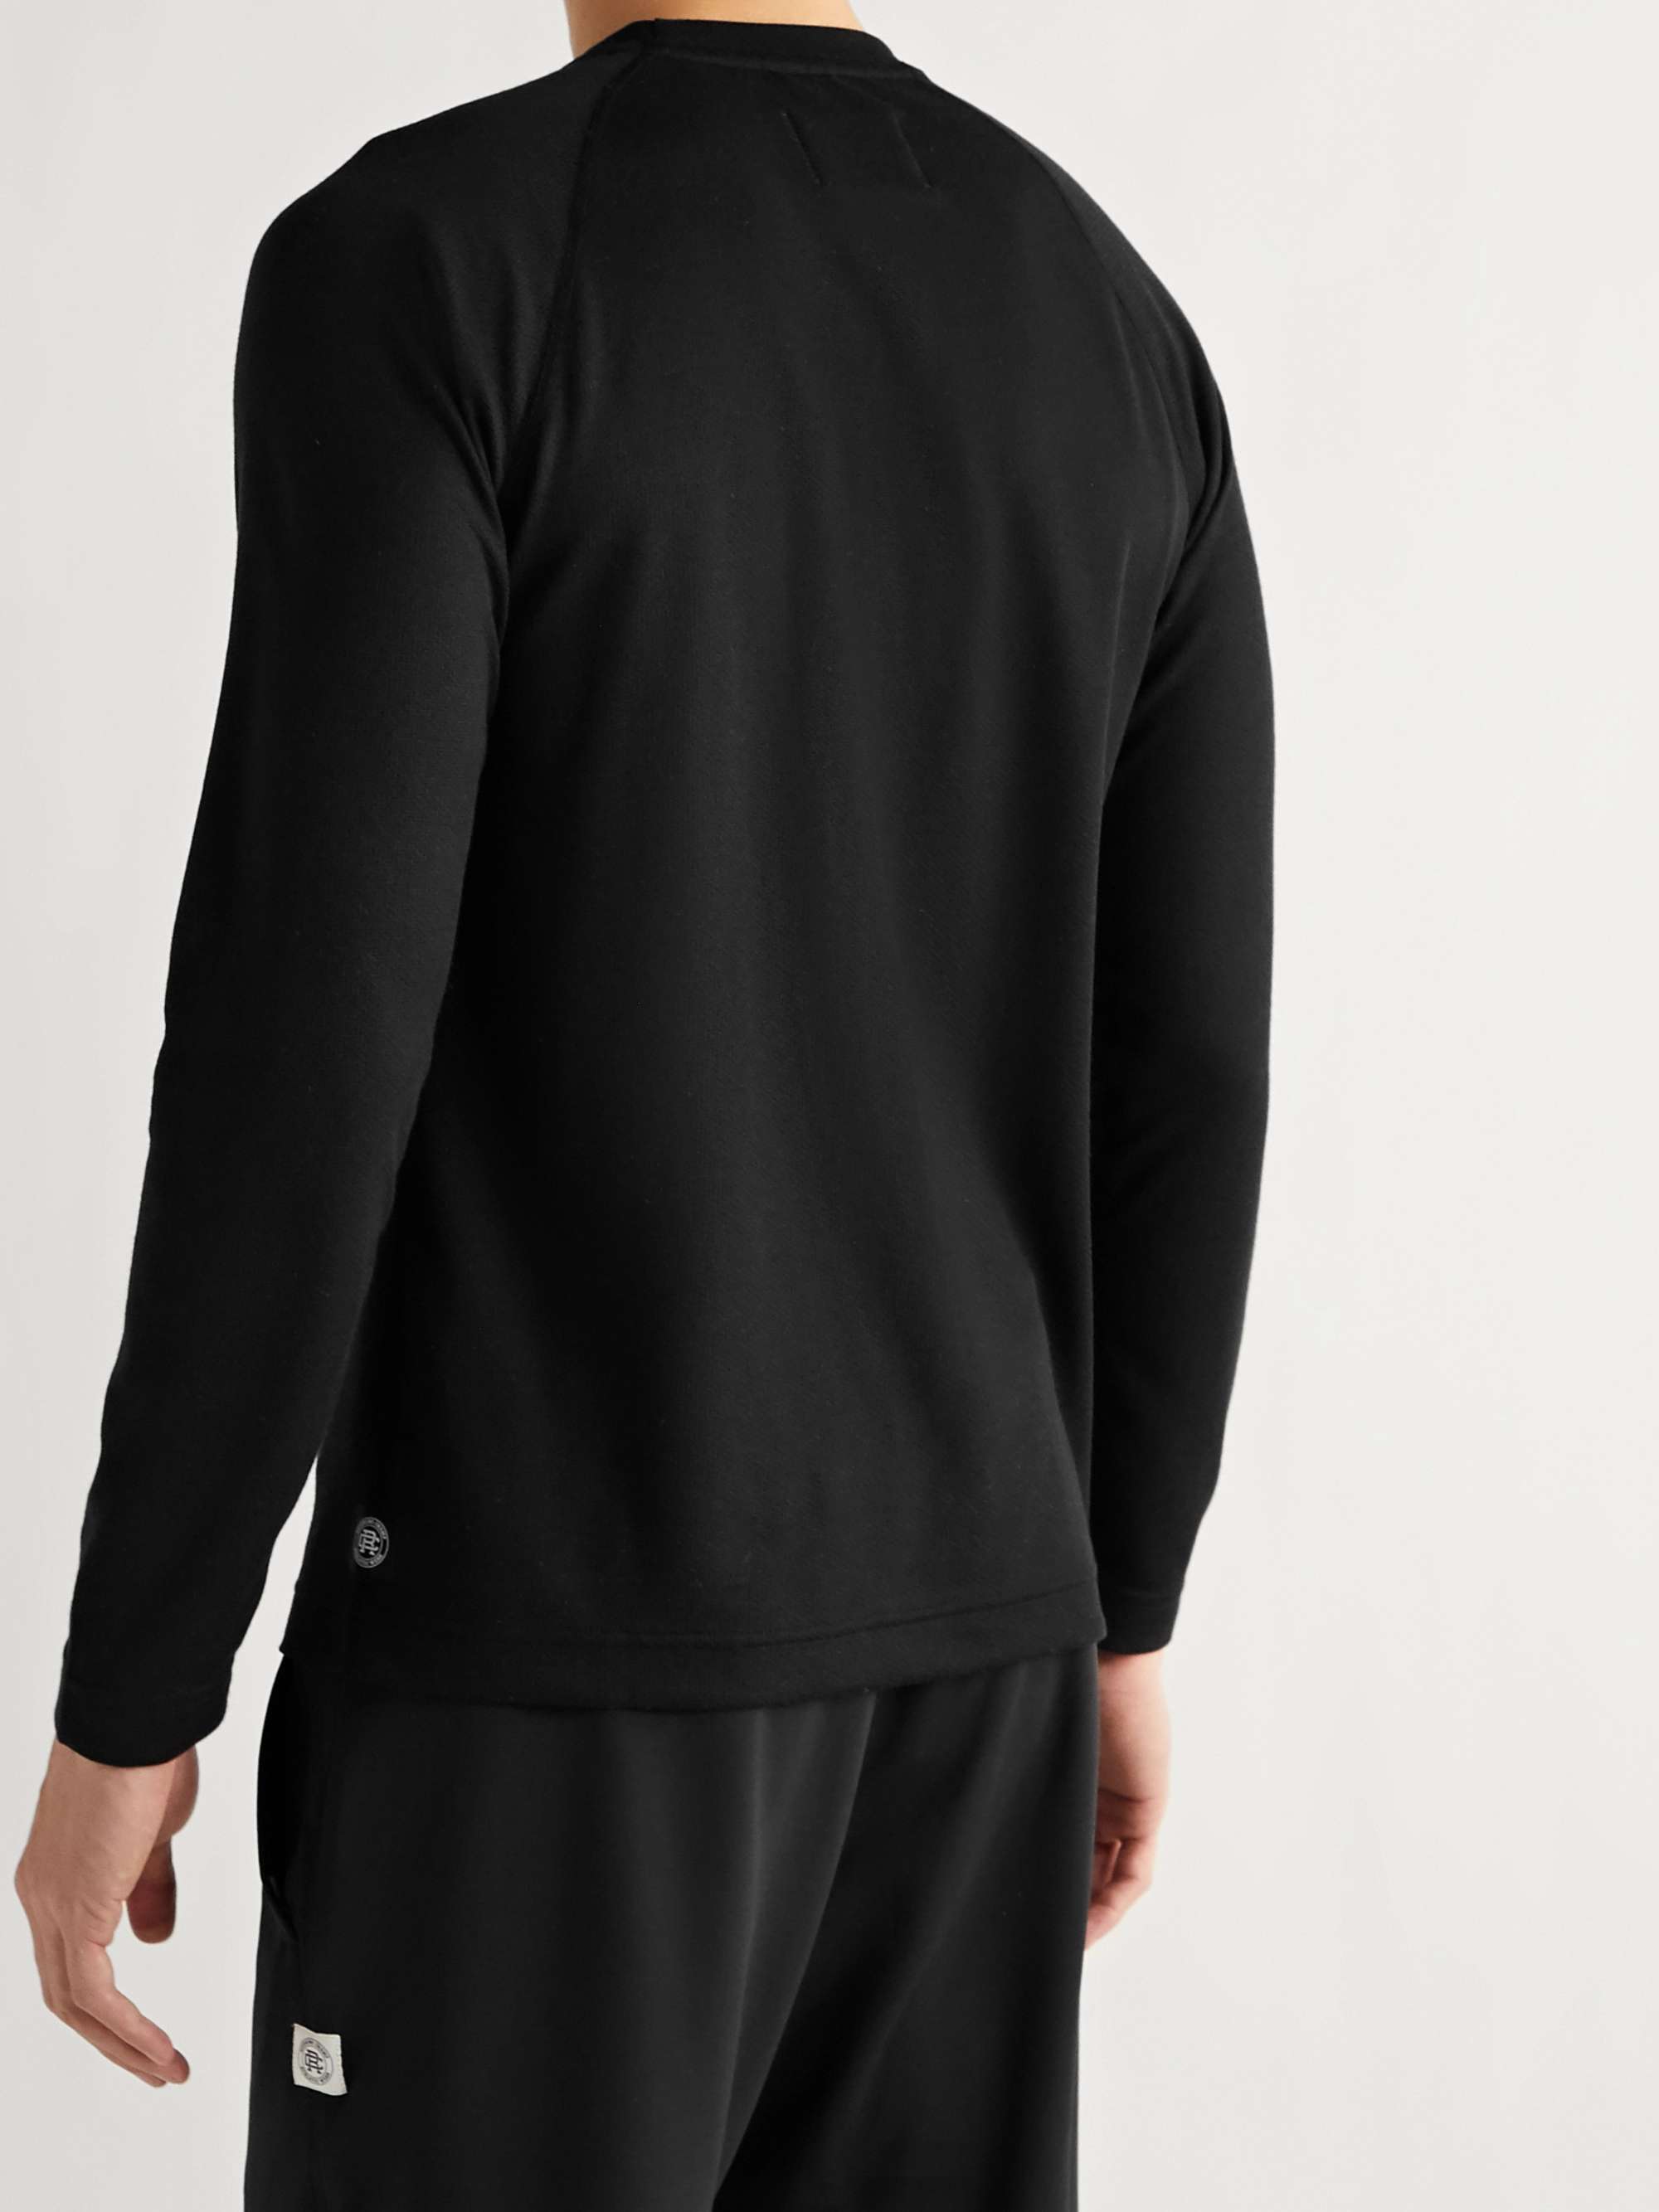 REIGNING CHAMP Slim-Fit Polartec Power Dry Mesh Base Layer